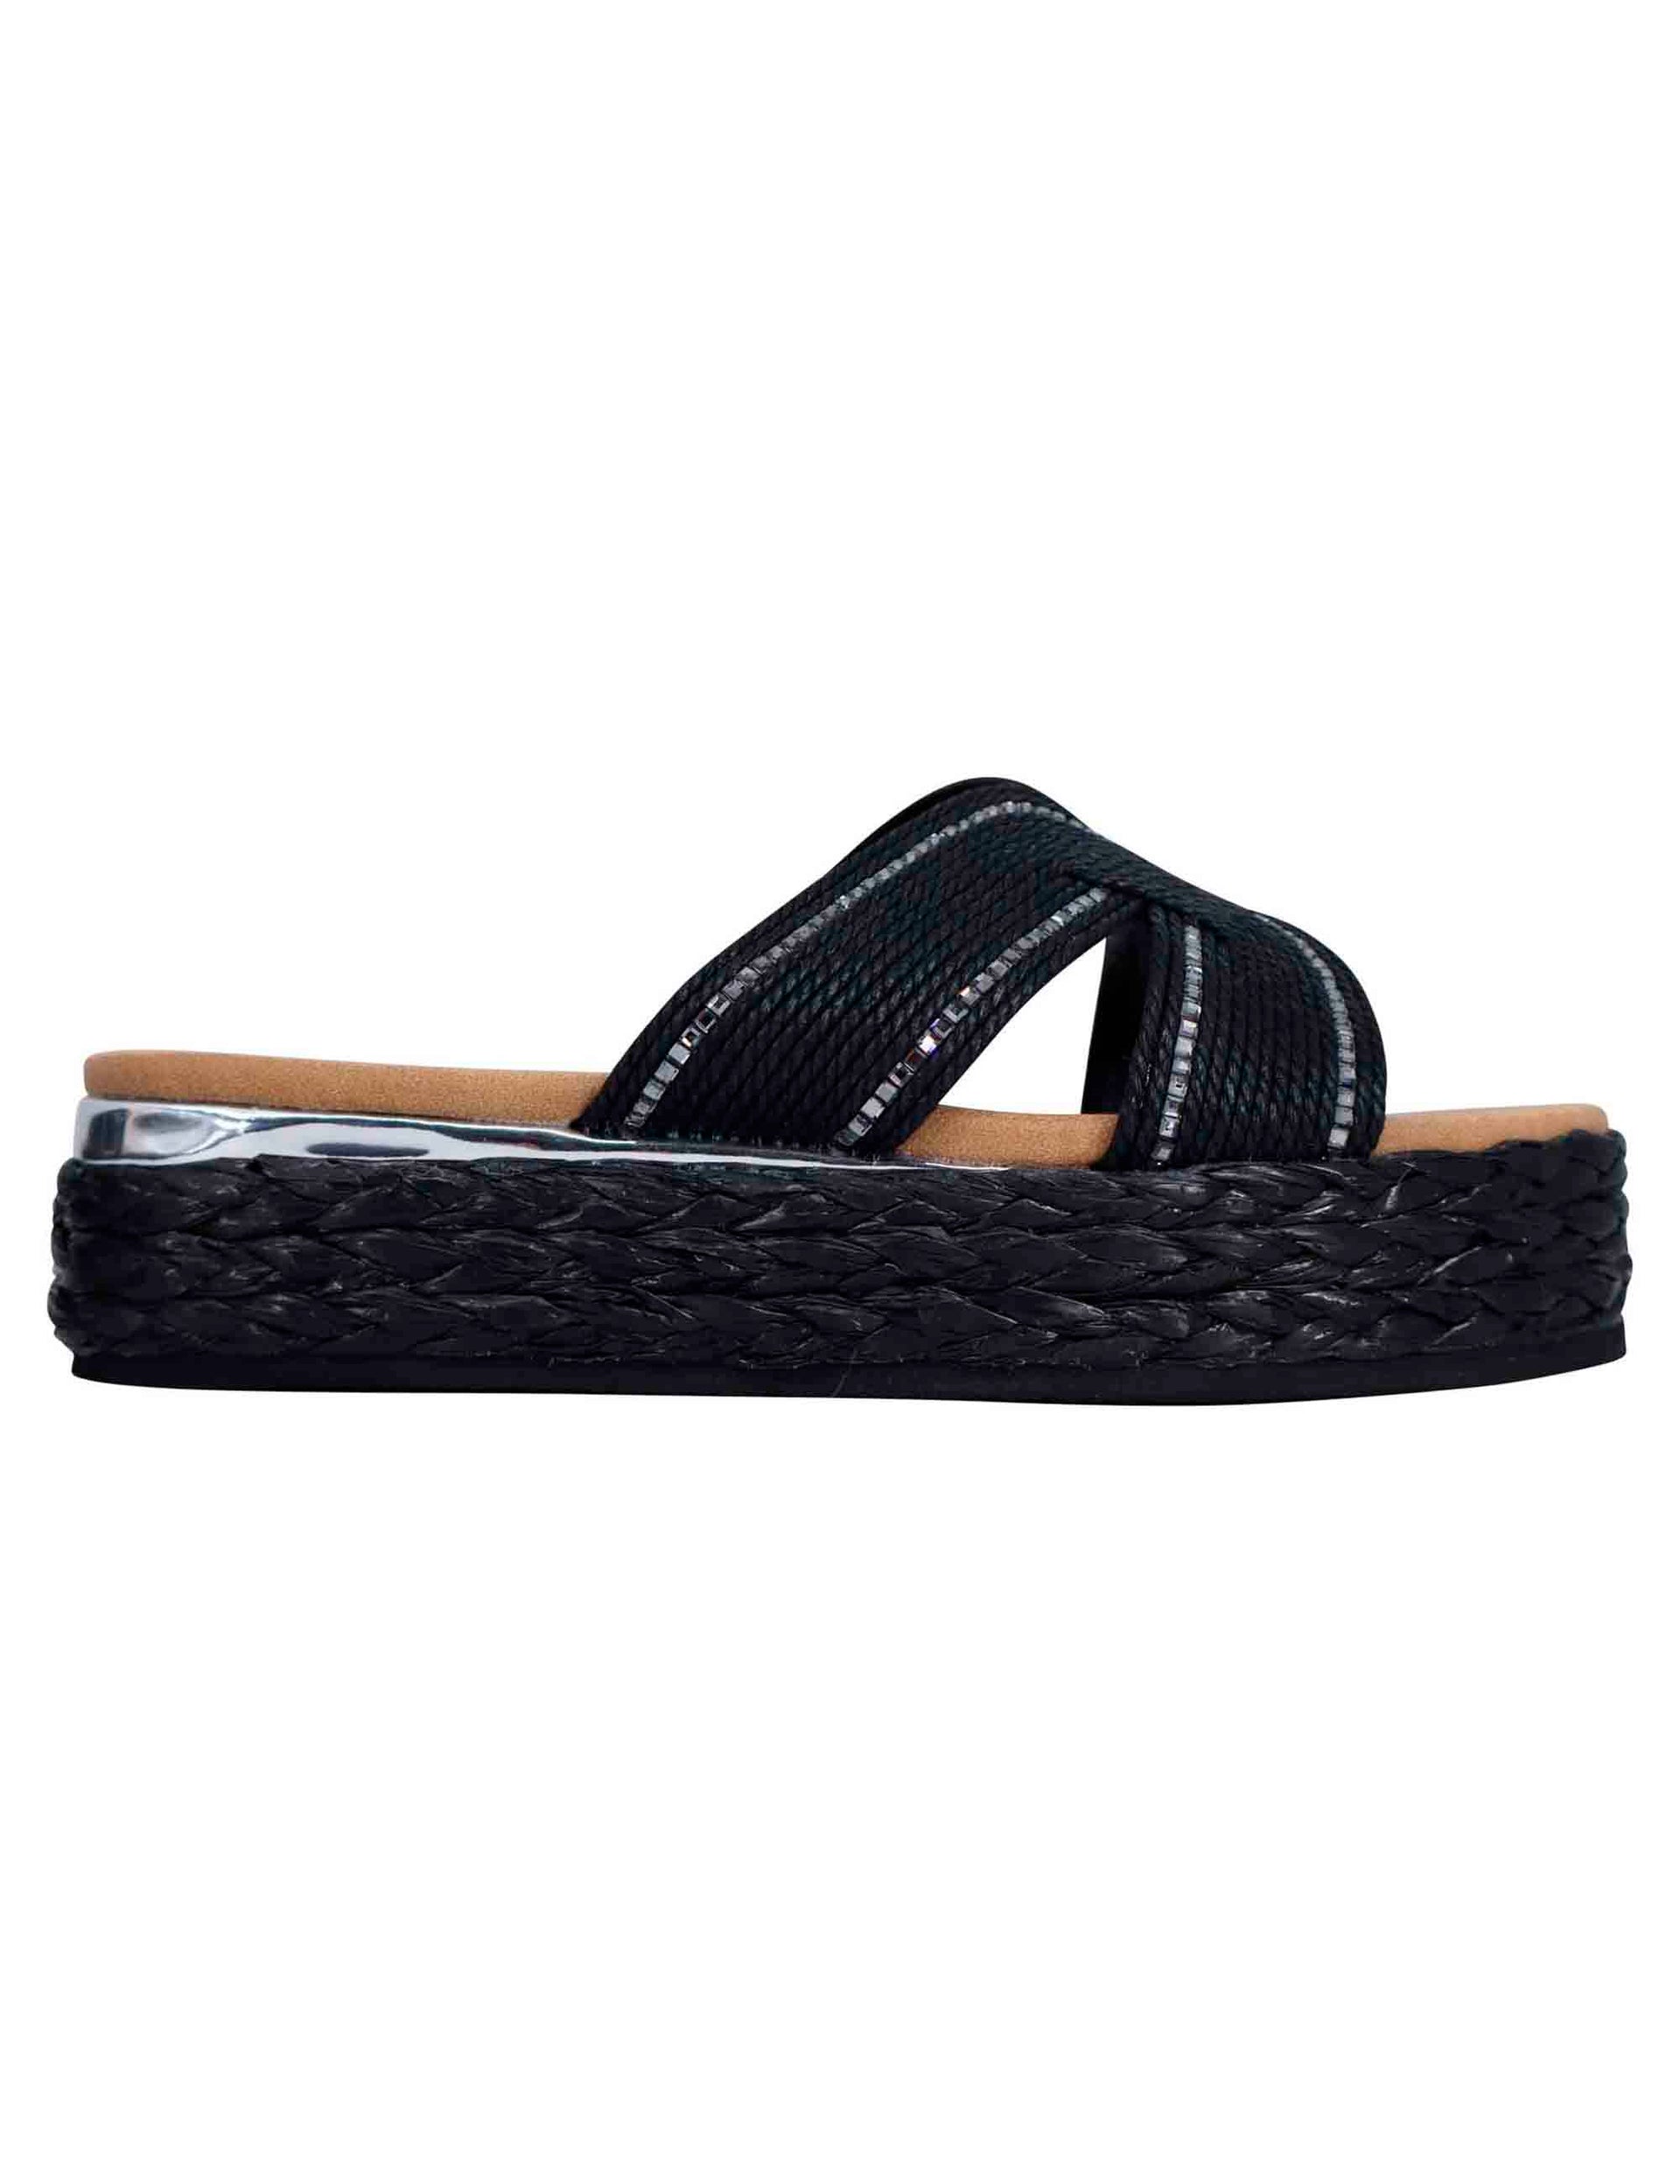 Women's black rope sandals with silver trim